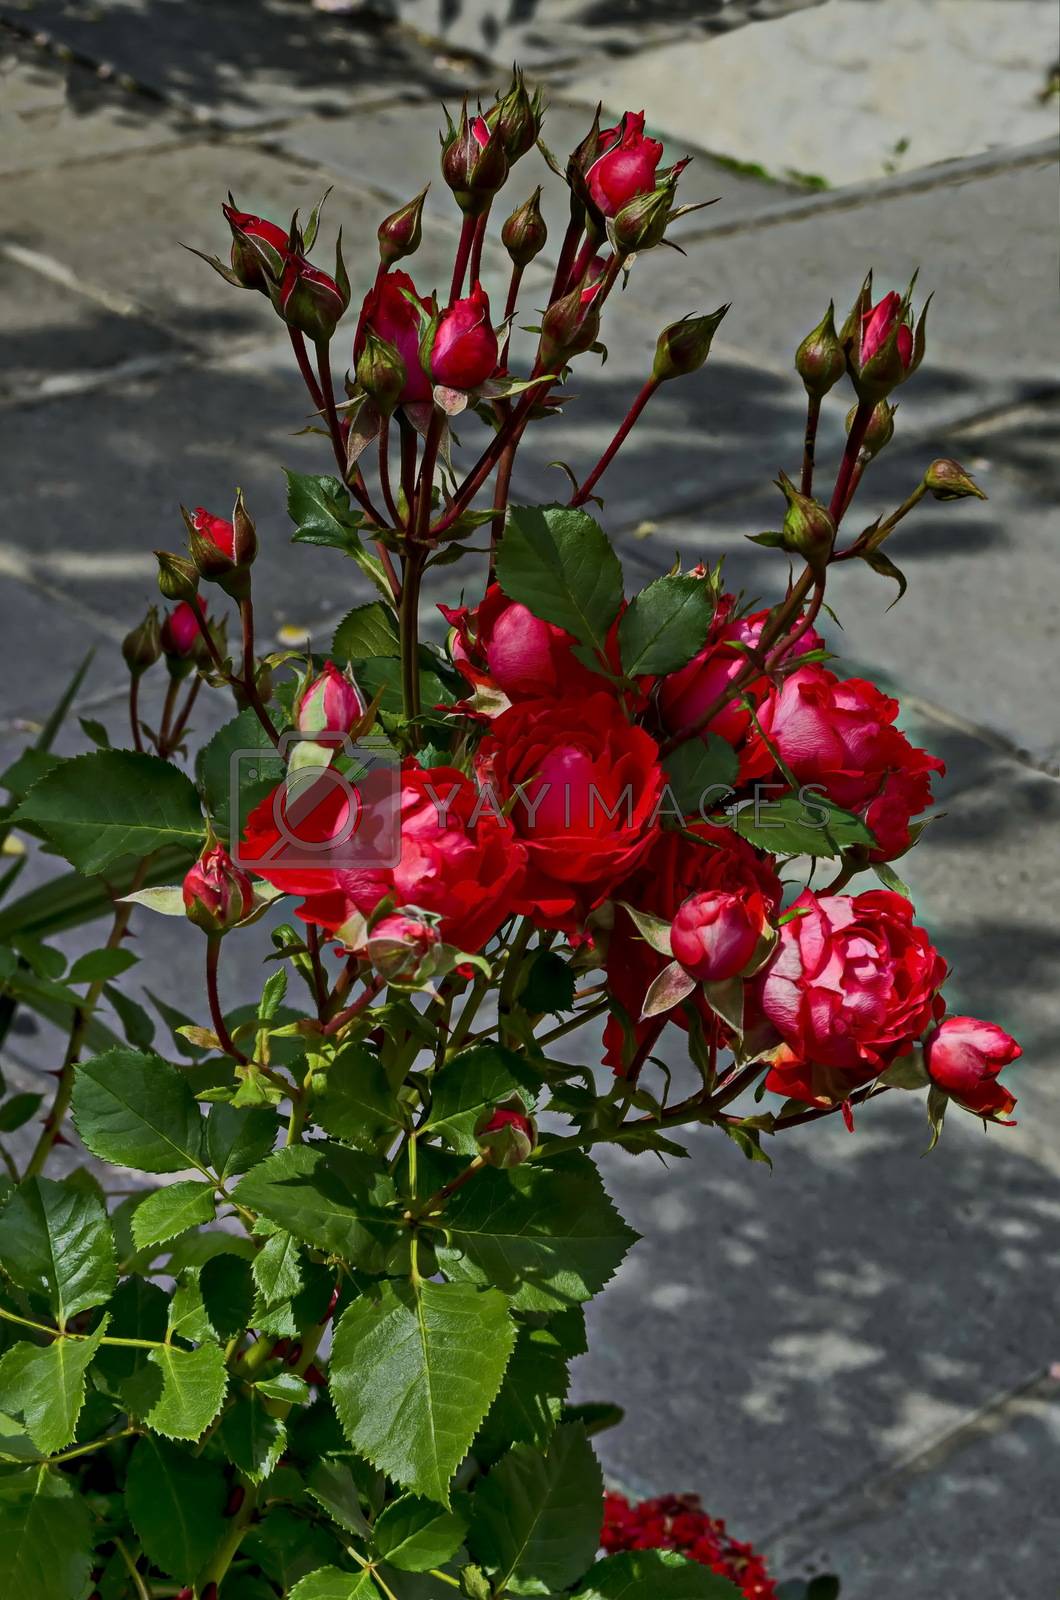 Royalty free image of Red rose bush in bloom at natural outdoor garden, district Drujba by vili45